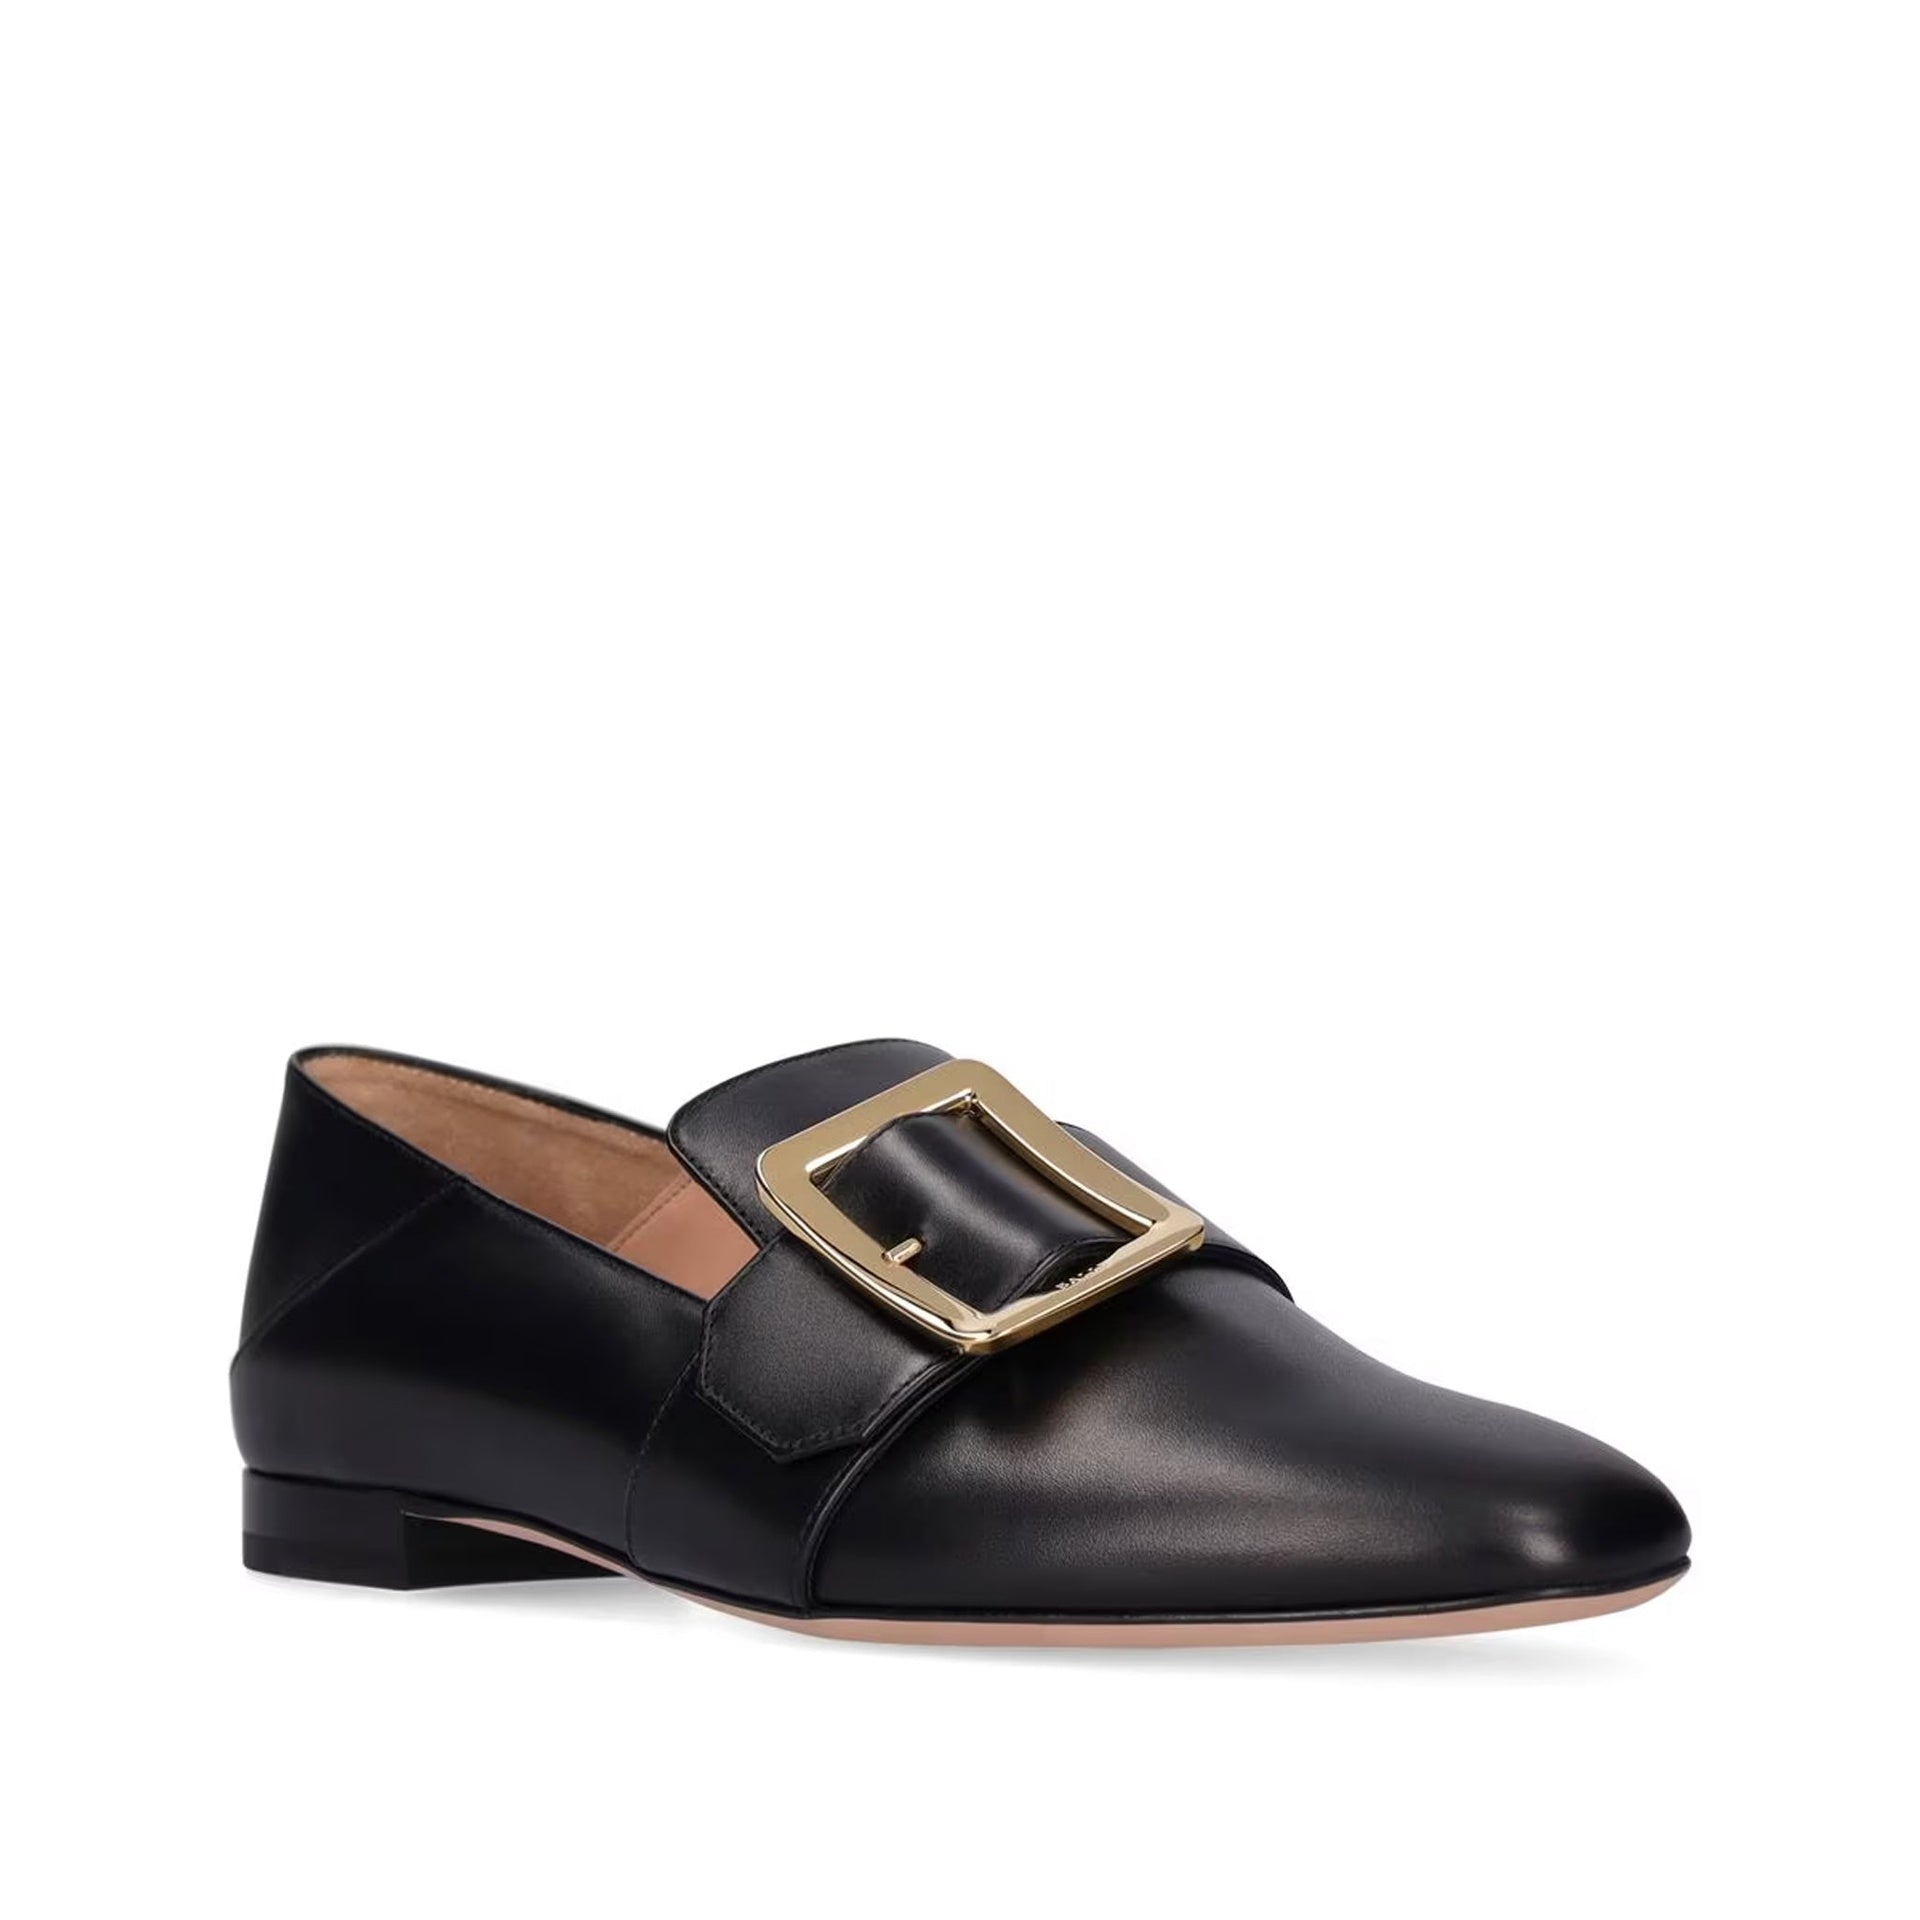 BALLY-OUTLET-SALE-Bally-Leather-Loafers-Halbschuhe-ARCHIVE-COLLECTION-2_08b71afa-e216-4915-bab0-7d69dd724c7d.jpg